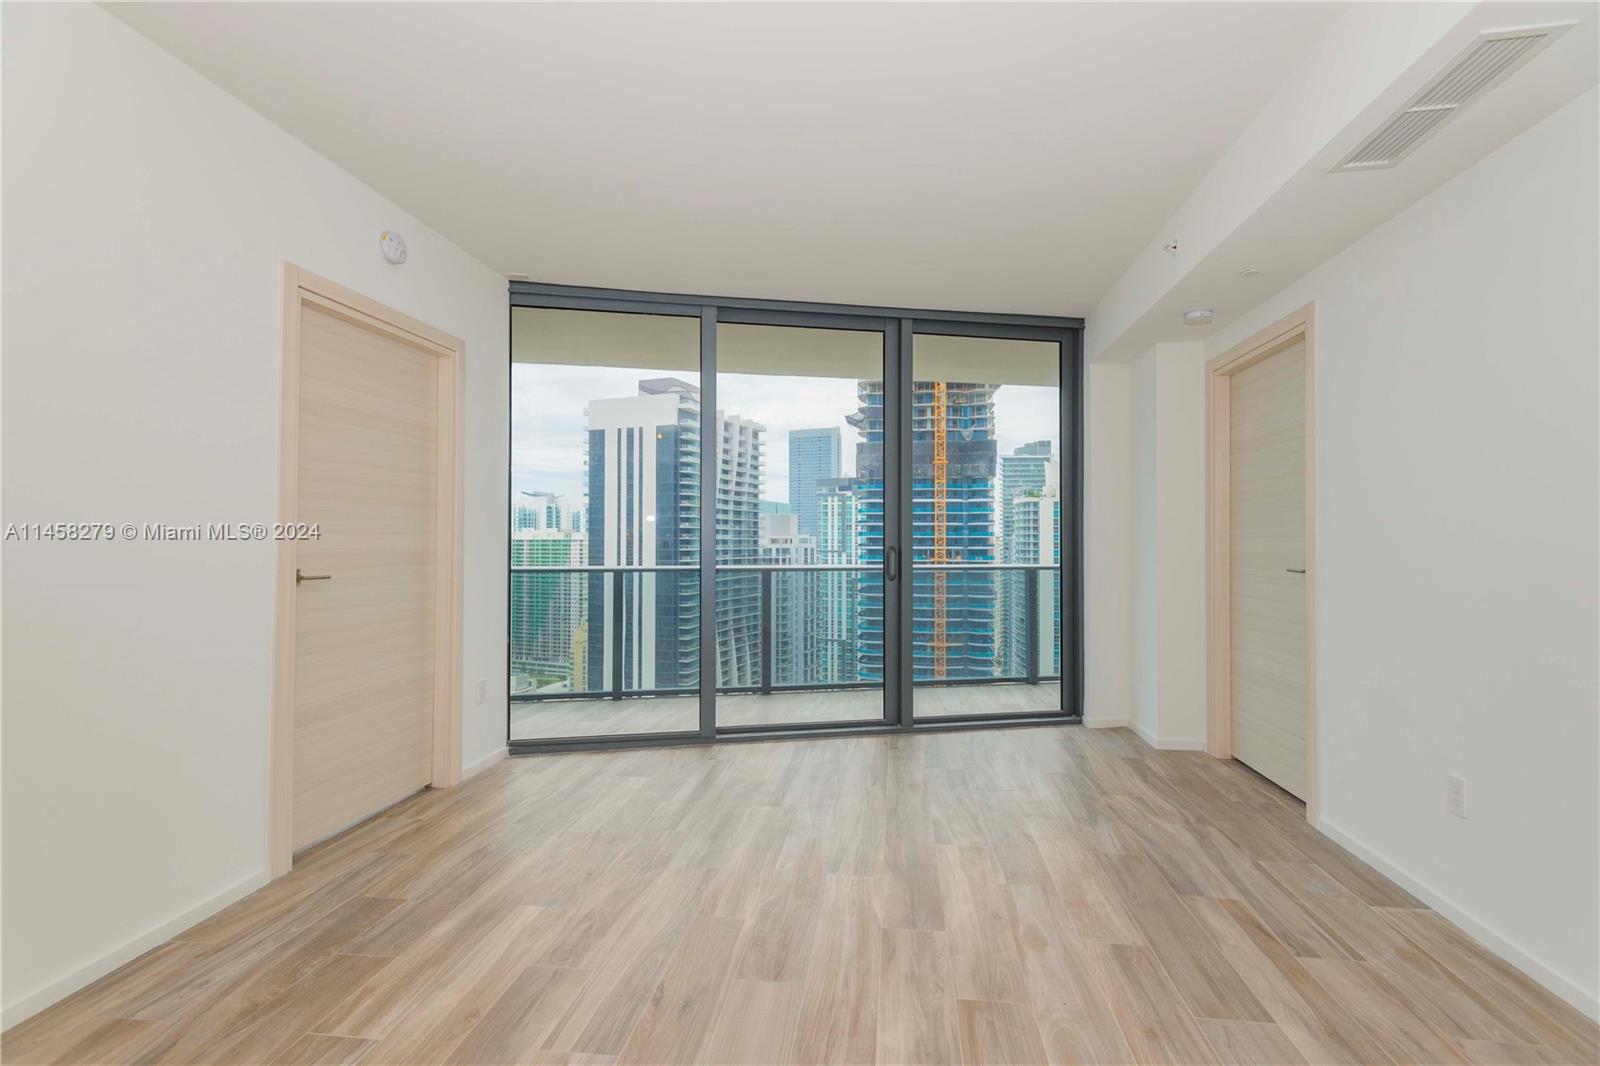 Discover opulence and Penthouse Living on the top of the 54th floor at SLS LUX, Brickell's gem. The unit offers 2BR, 2.5BA, and a Den and over 10 ft Ceilings ( vs 9ft for units under the 49th floor) seamlessly blending style, space and modernity. A private foyer elevator ushers you into a realm of elegance, showcasing an oversized balcony with stunning Bay and City views and surise and sunset . The modern kitchen boasts Wolf appliances and Italian cabinetry. Top-tier amenities include a 59th-floor rooftop sky pool, Sky Bar, state-of-the-art fitness center, and spa. Embrace resort-style living with tennis courts, renowned restaurants directly onsite, and endless recreational facilities. Enjoy the 5-star services of hospitality while being home and the sleek design of Yabu Pushberg